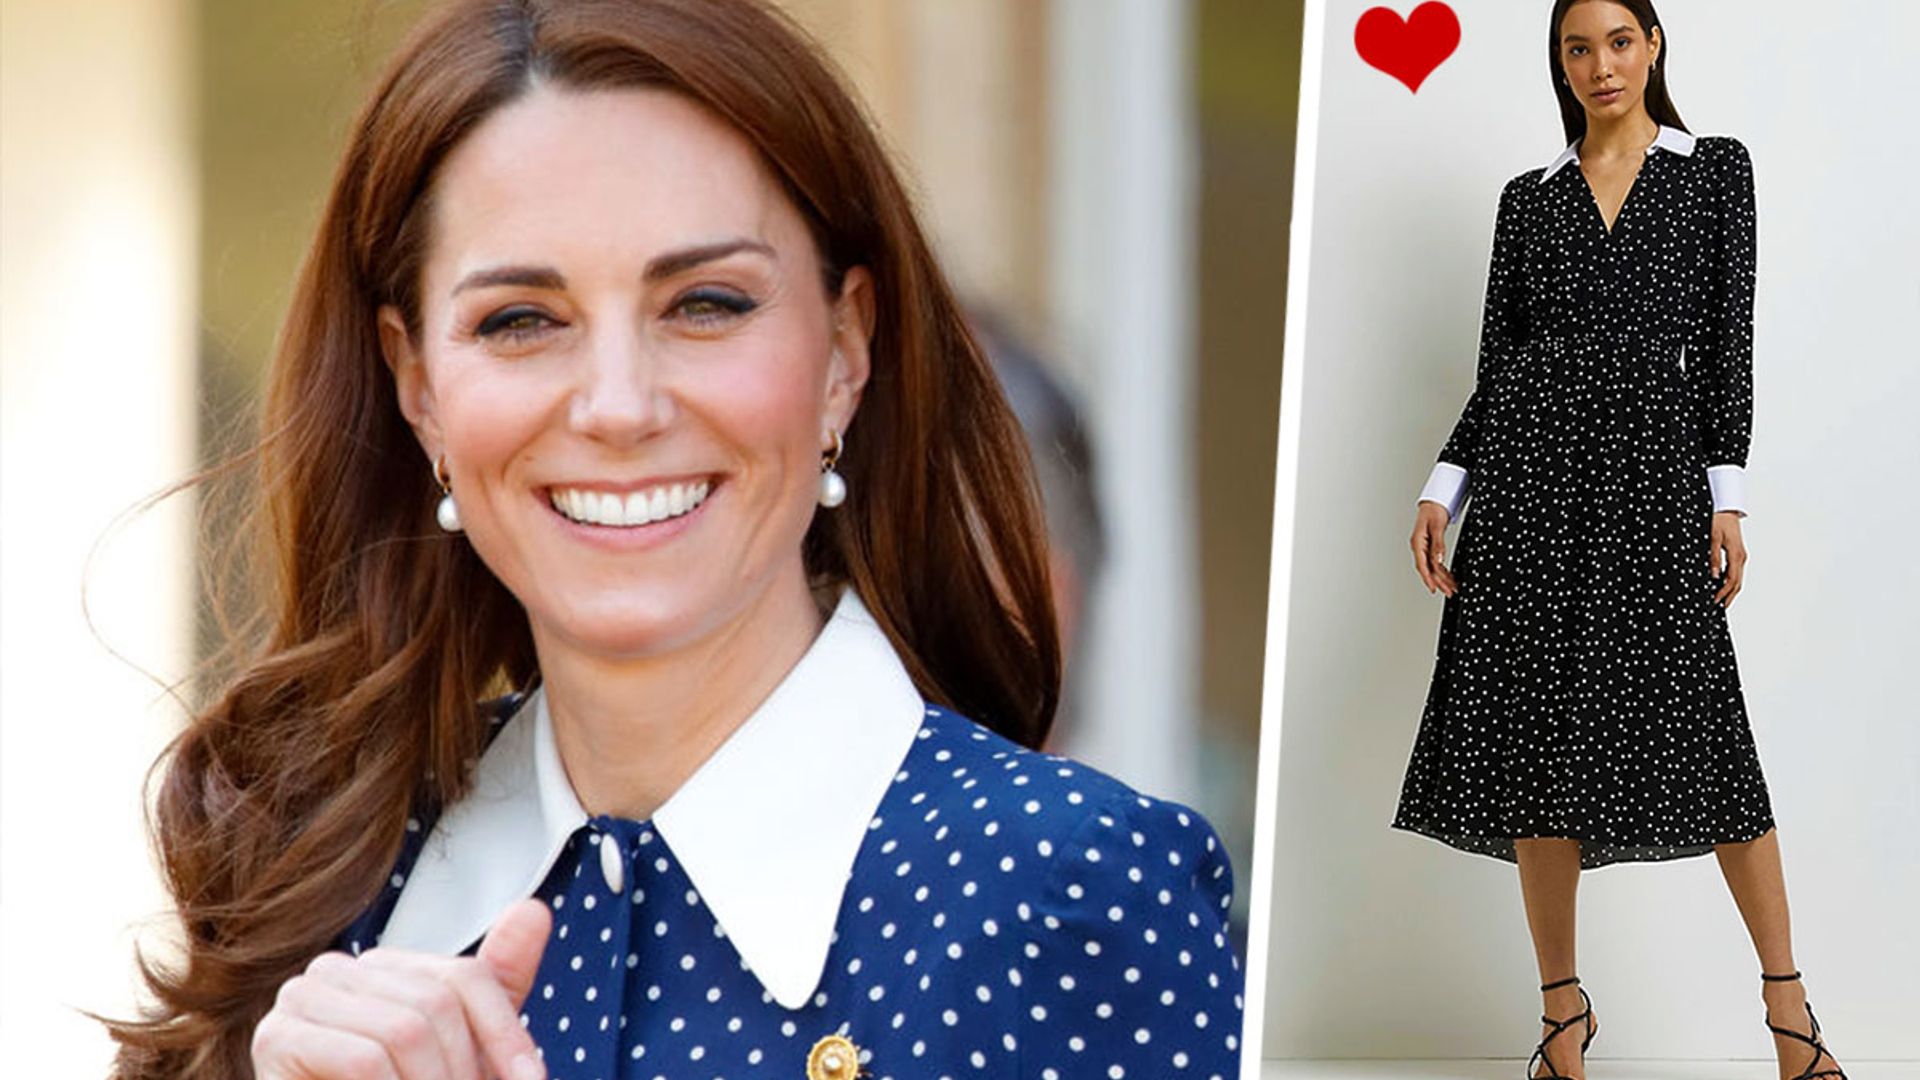 Kate Middleton, The Duchess Of Cambridge's Best Ladylike Top